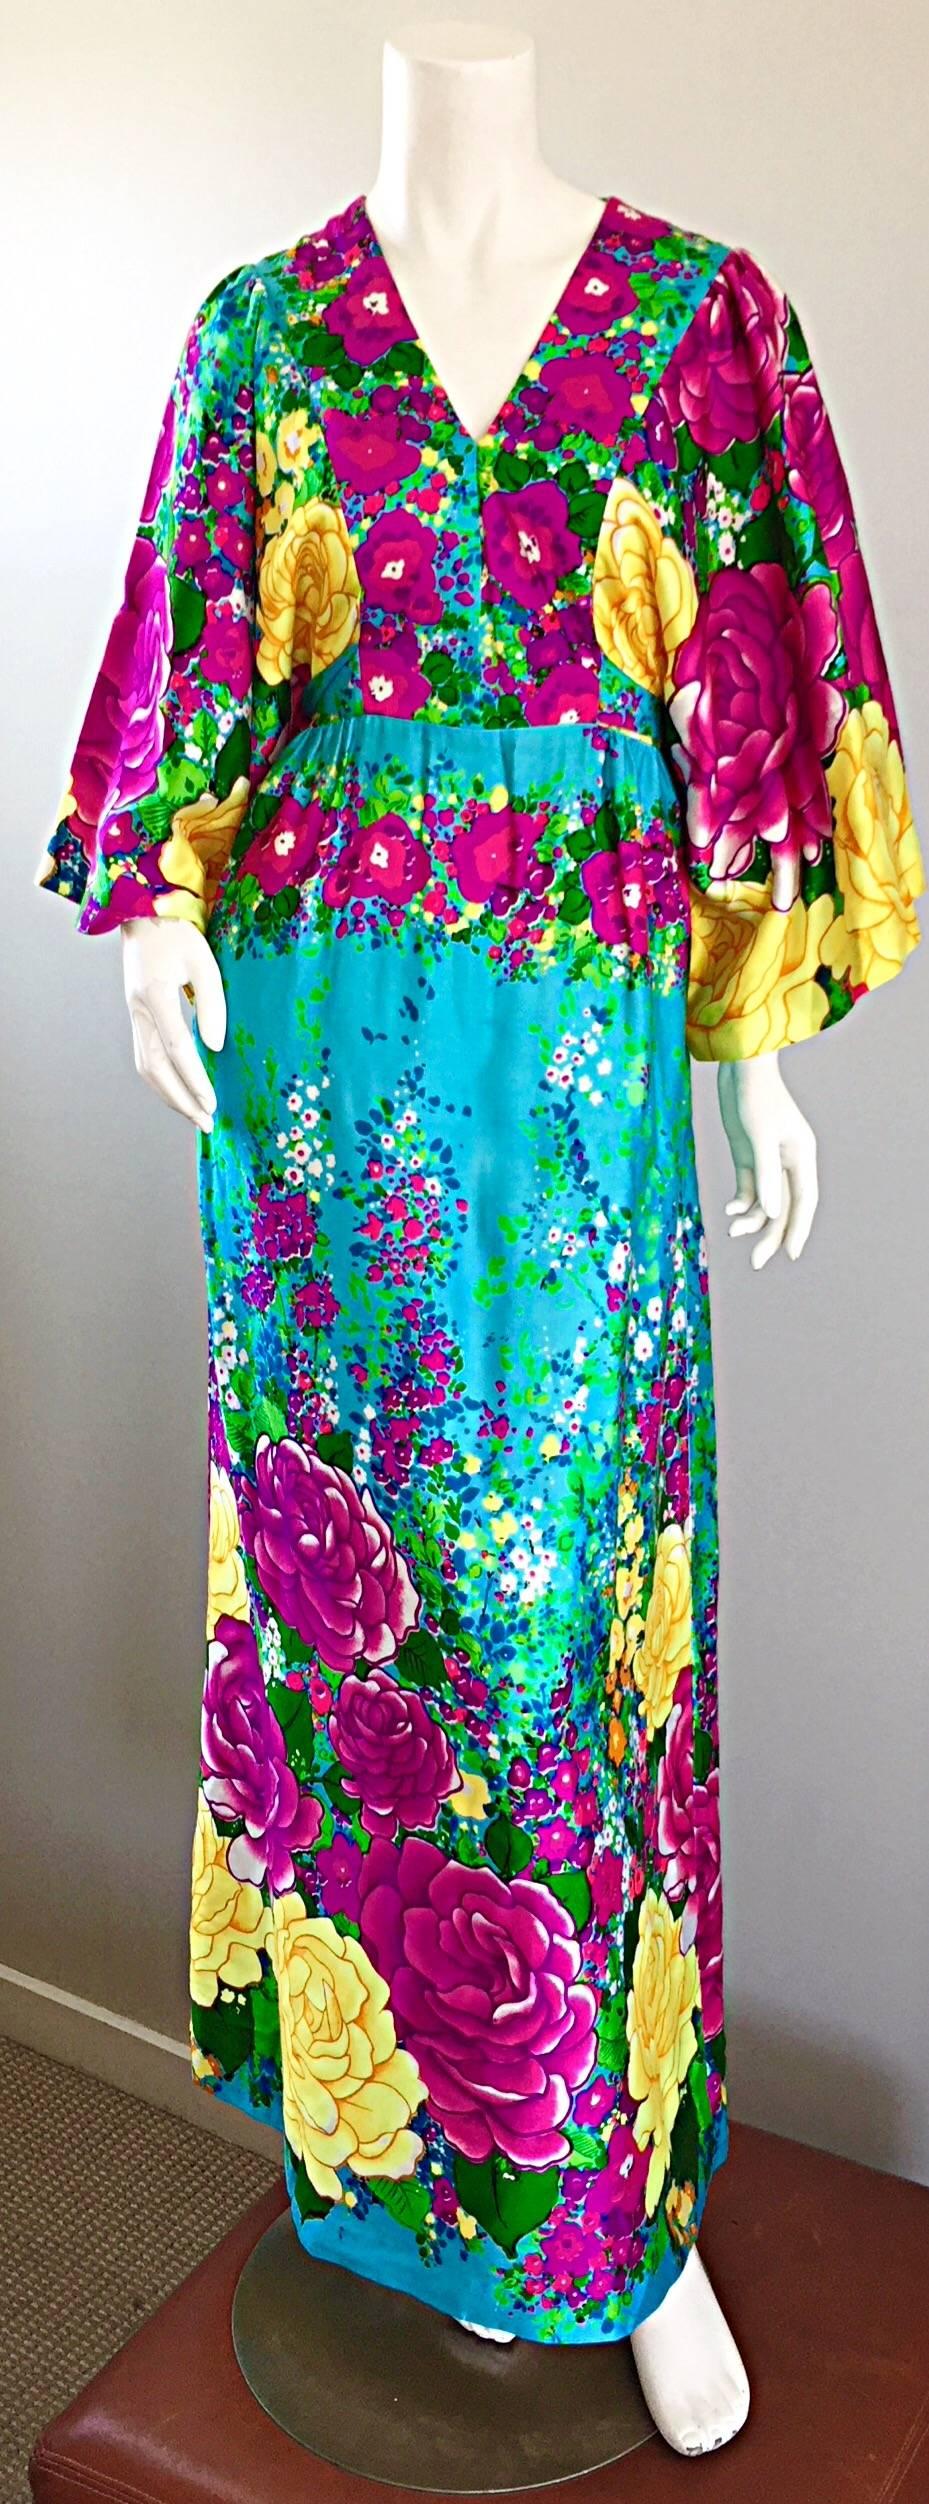 Amazing vintage 1970s HILO HATTIE by EVELYN MARGOLIS kimono style maxi dress / Hawaiian kaftan! Incredible vibrant bright colors, with a chic floral print in blue, teal, pink, fuchsia, purple, green, lime, yellow, etc.. Attached belt ties in the